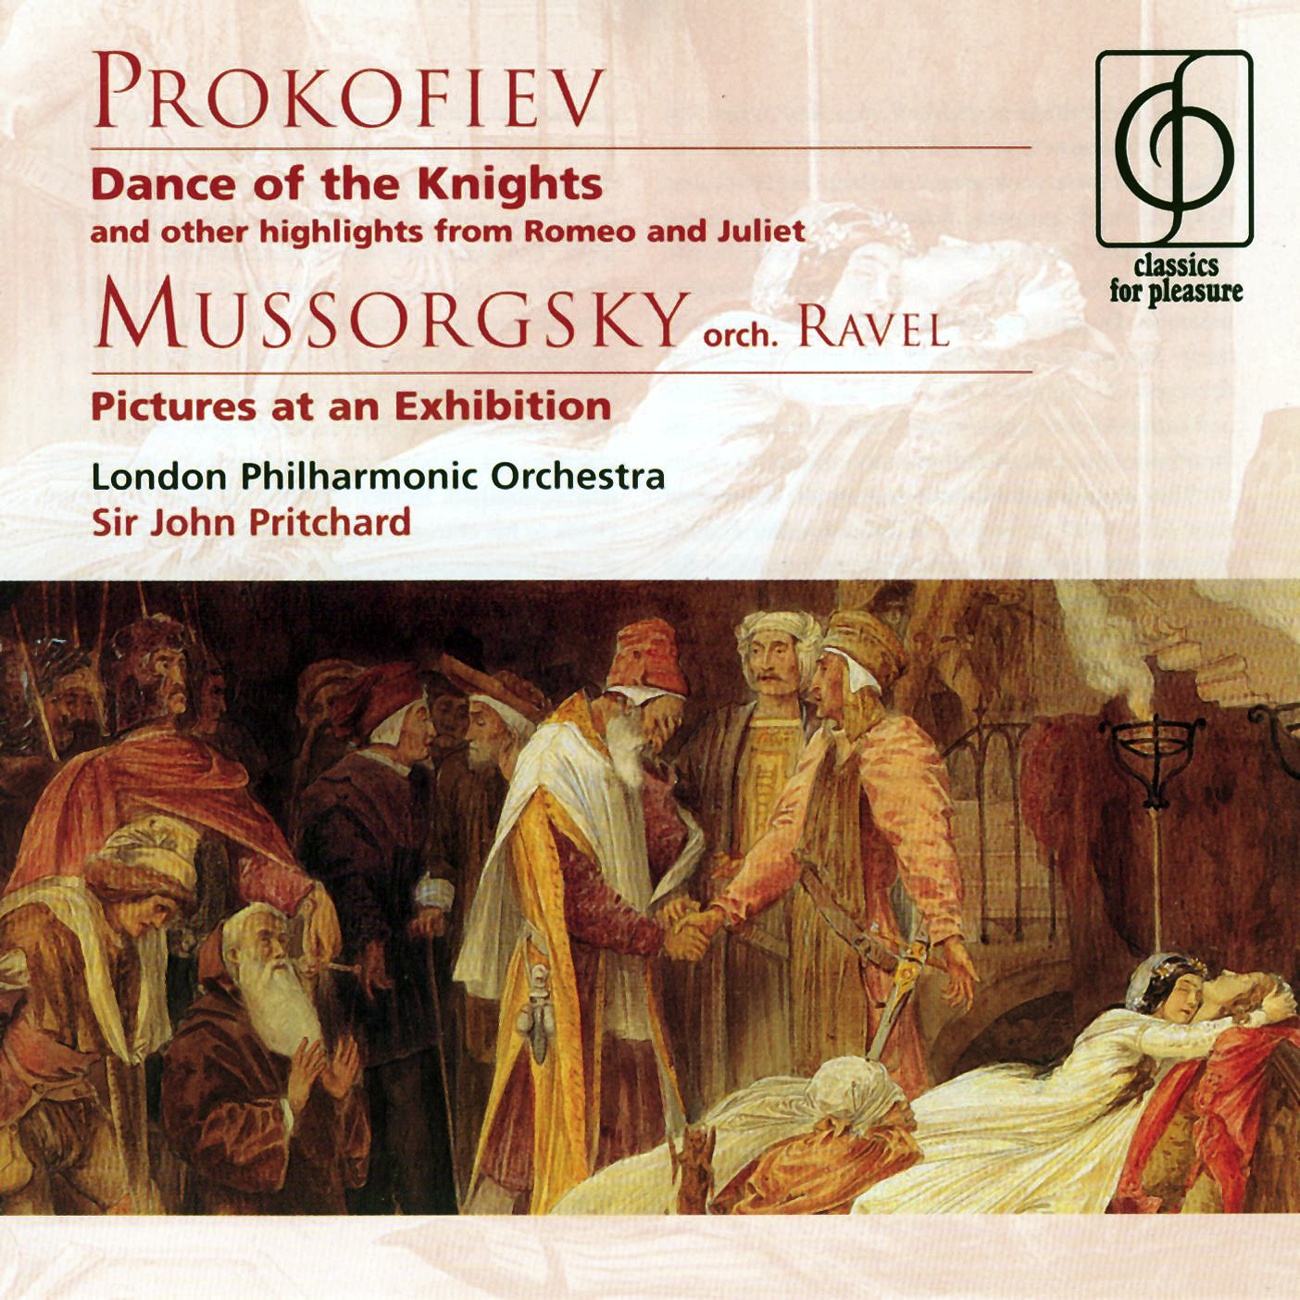 Pictures at an Exhibition (orch. Ravel) (1970 Digital Remaster): The Catacombs